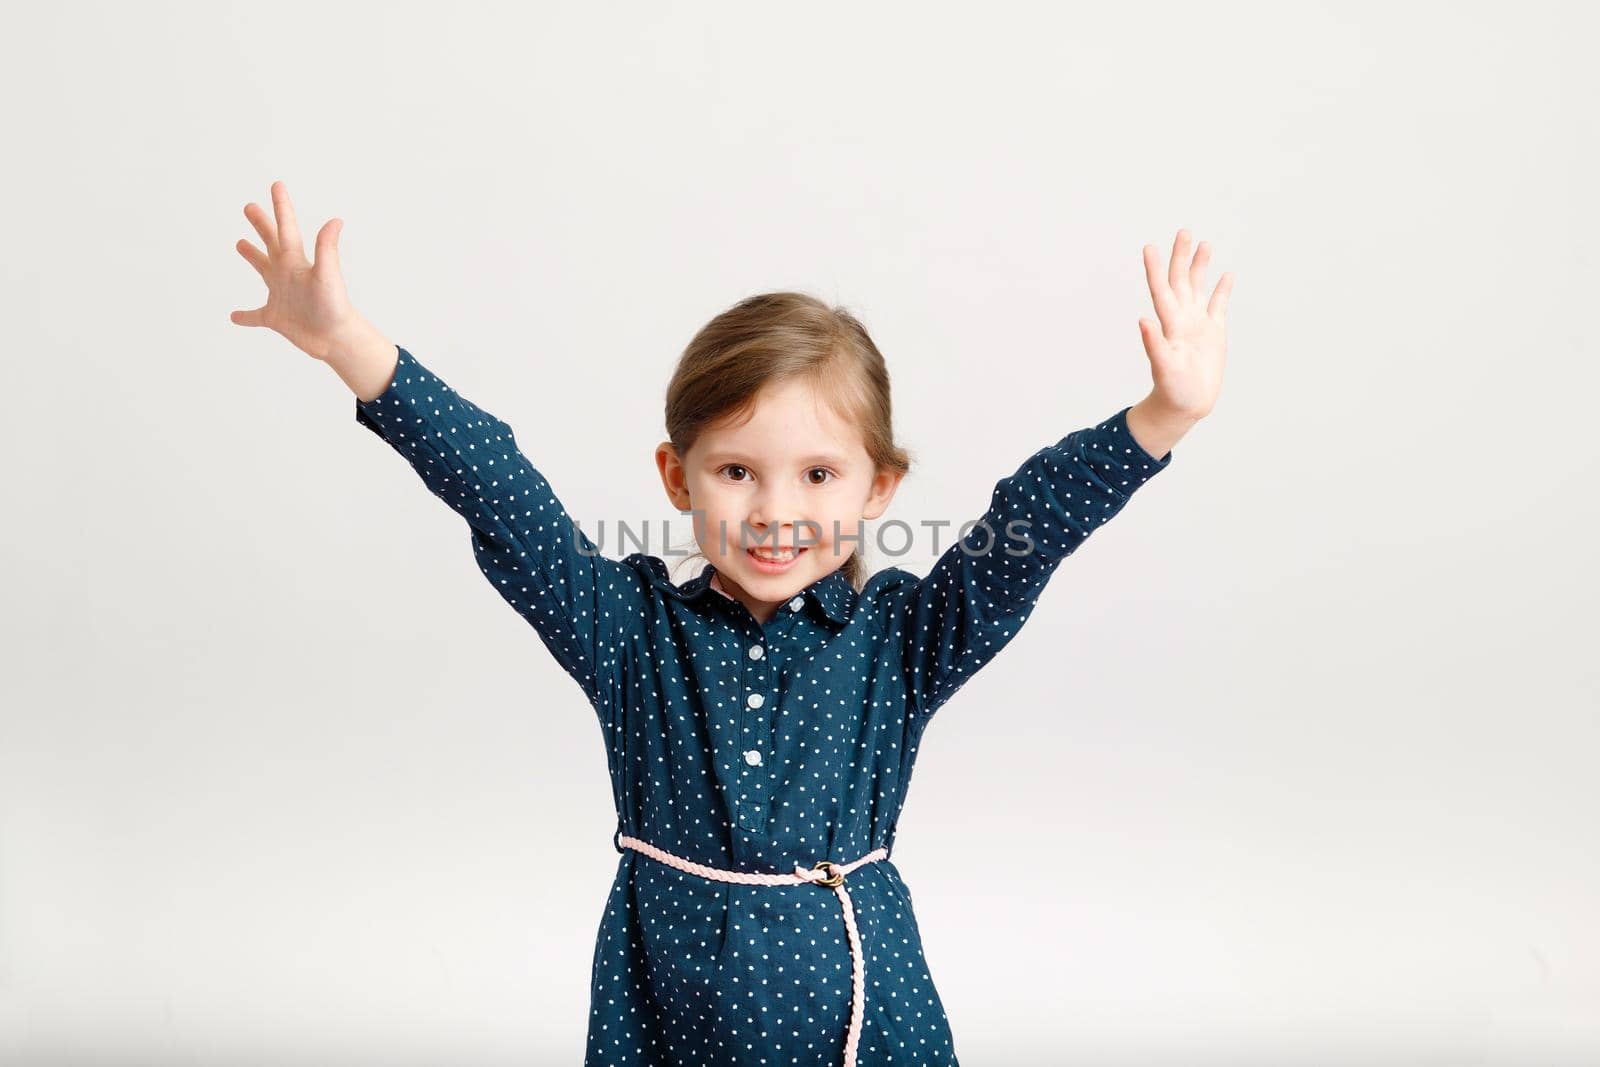 Little cute happy smiling girl 4-6 years old wearing a blue dress with polka dots standing with hand up. Cute kid girl on a white background